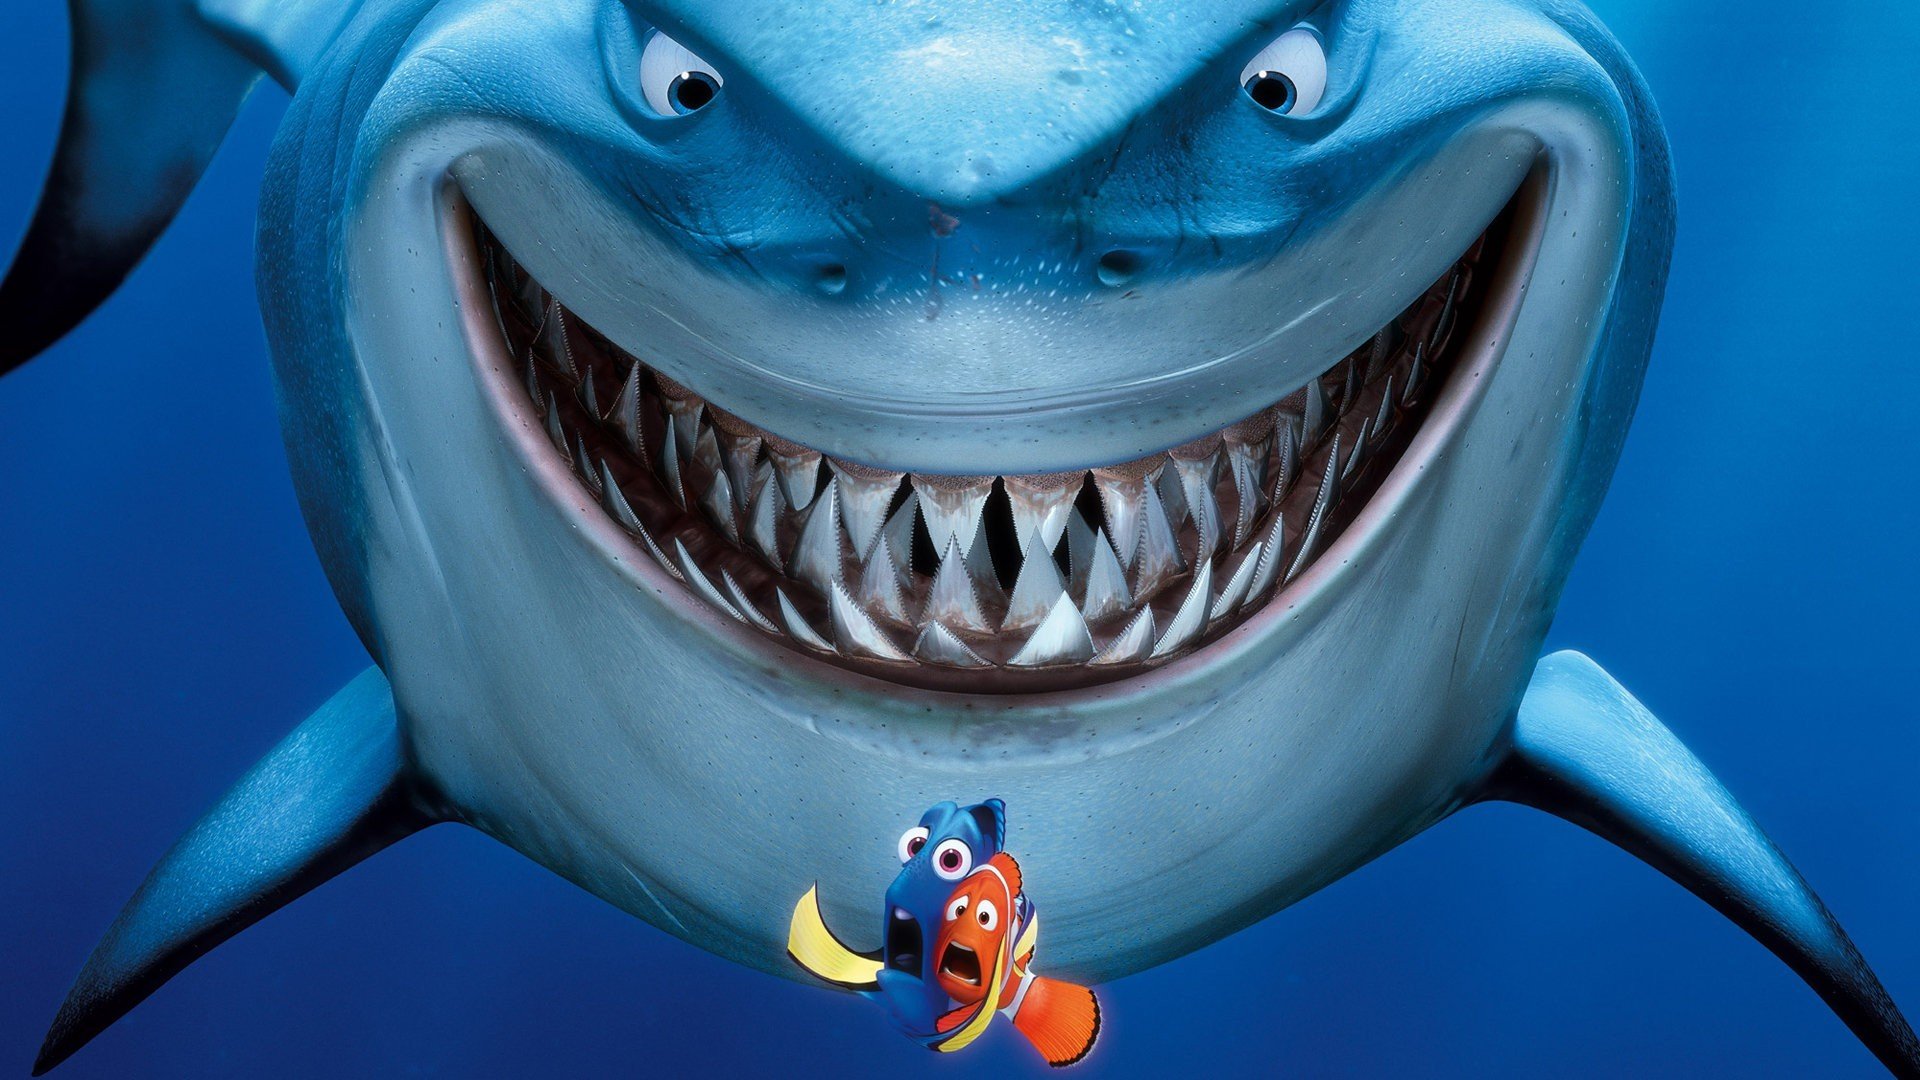 HQ Finding Nemo Wallpapers | File 294.6Kb